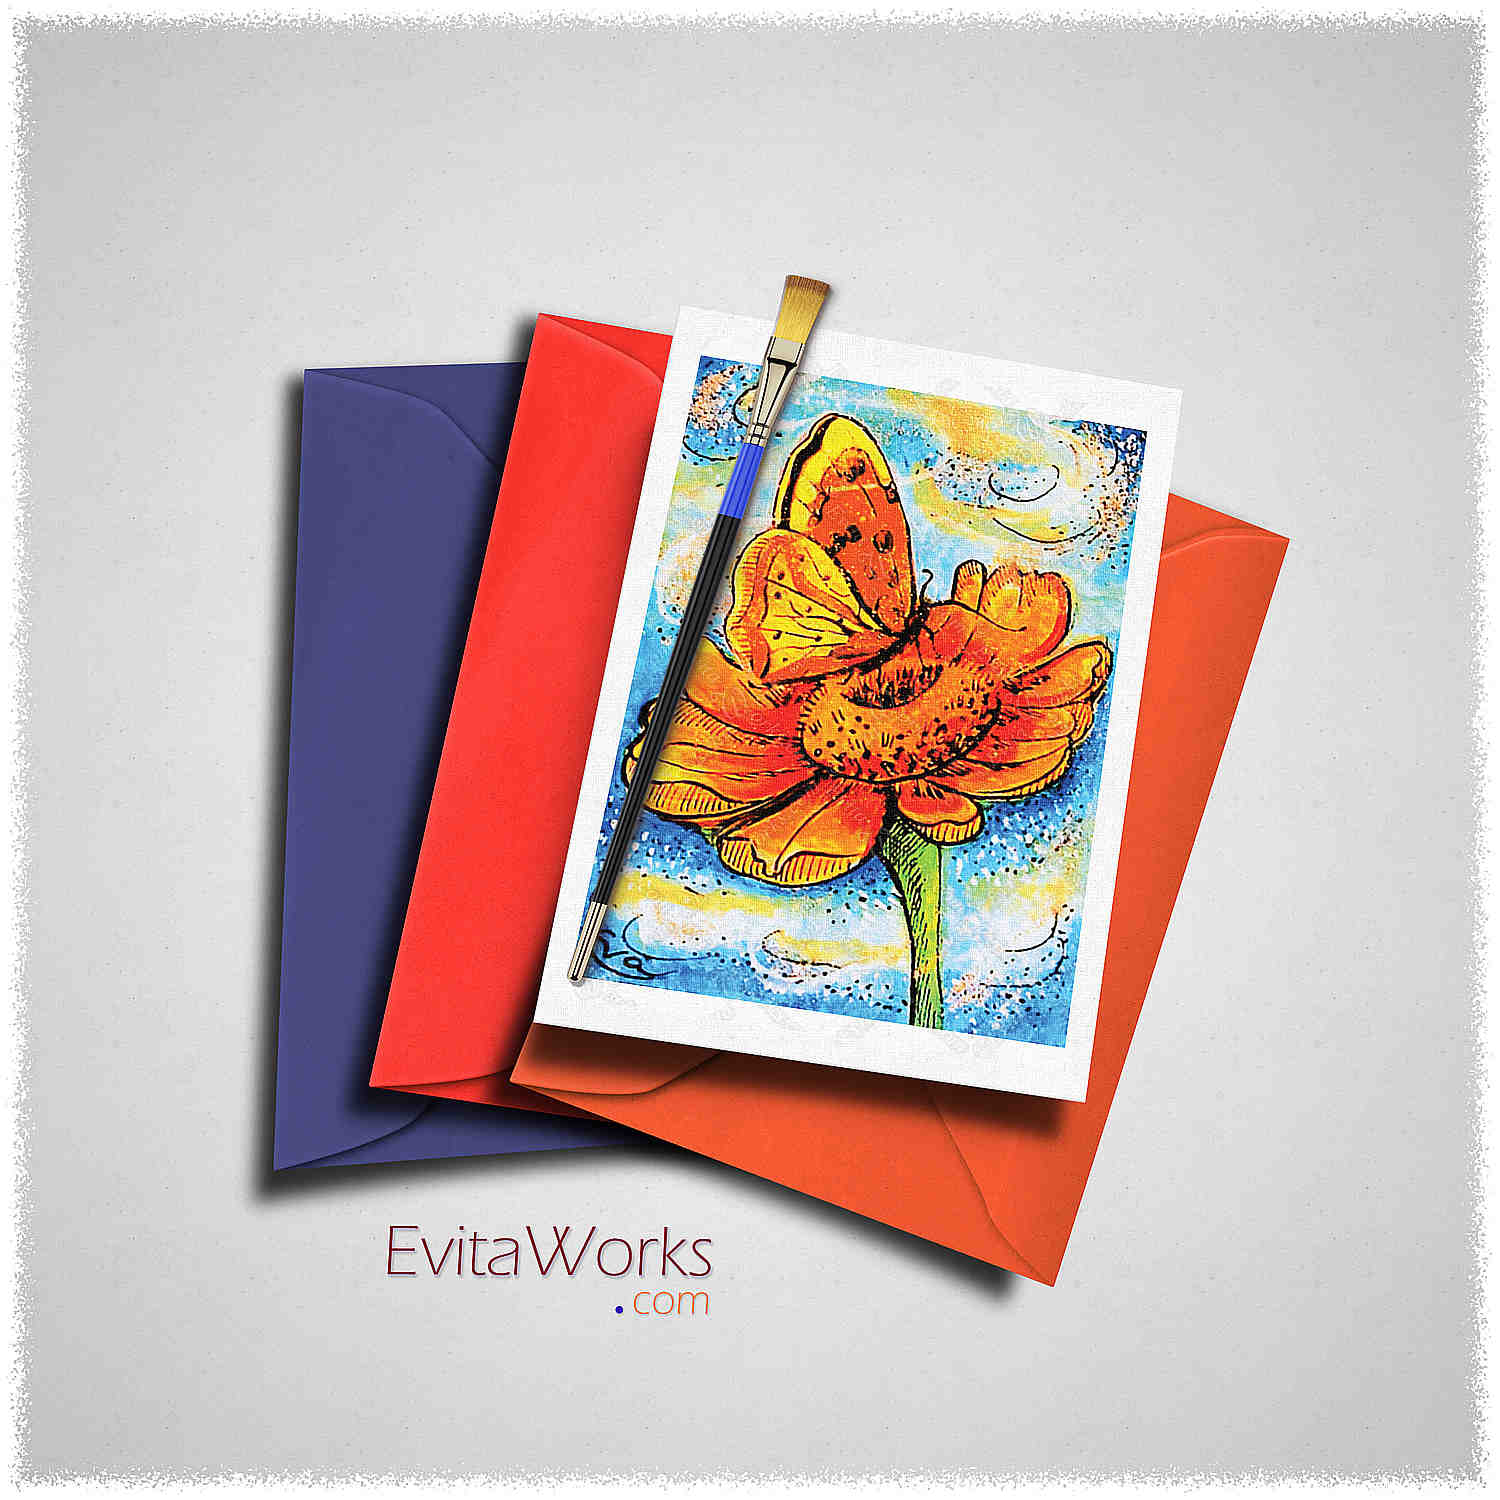 Hit to learn about "Butterfly illustration 99" on cards